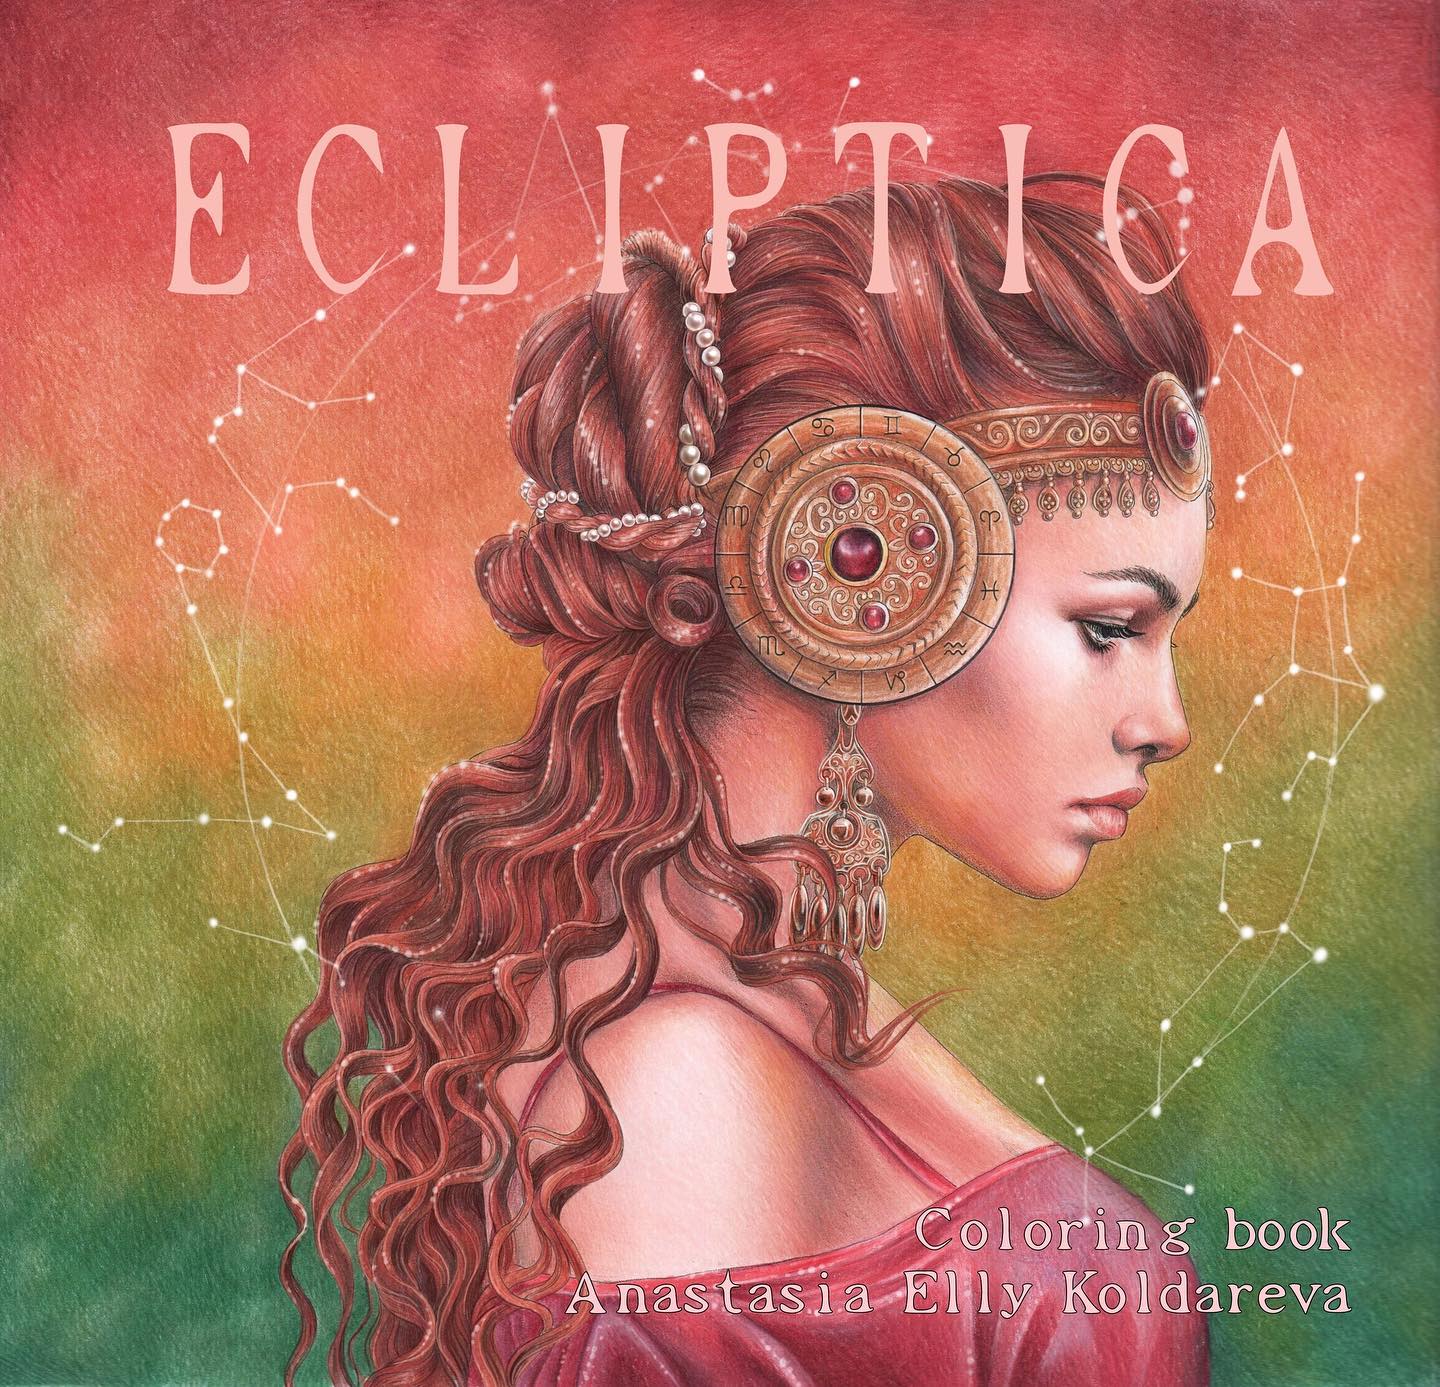 [COLORING] Ecliptica Coloring book by Anastasia Elly(will be sent after the end of Aug)